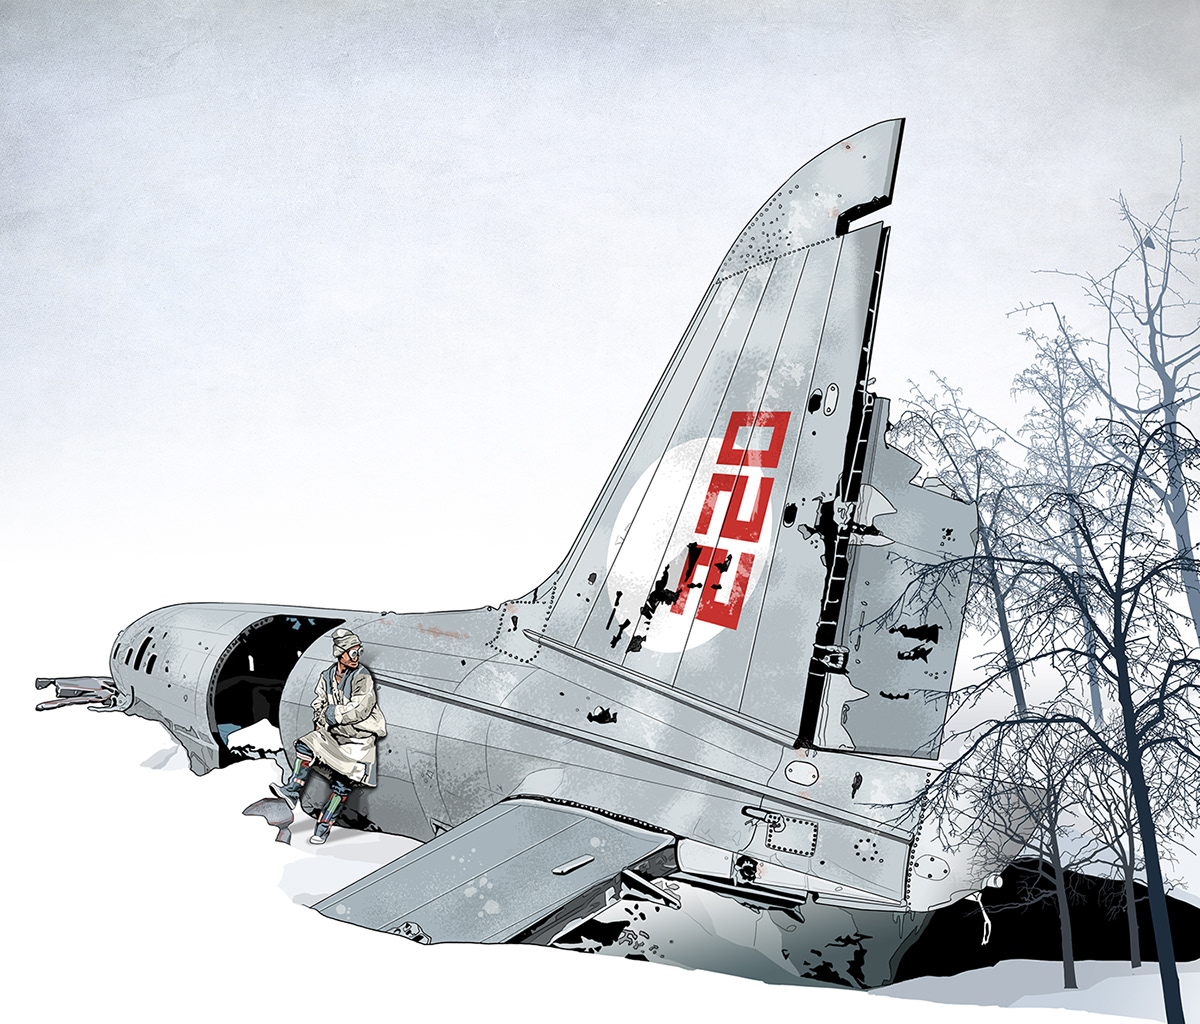 winter snow plane wreck sherpa trees storm clouds SKY grey